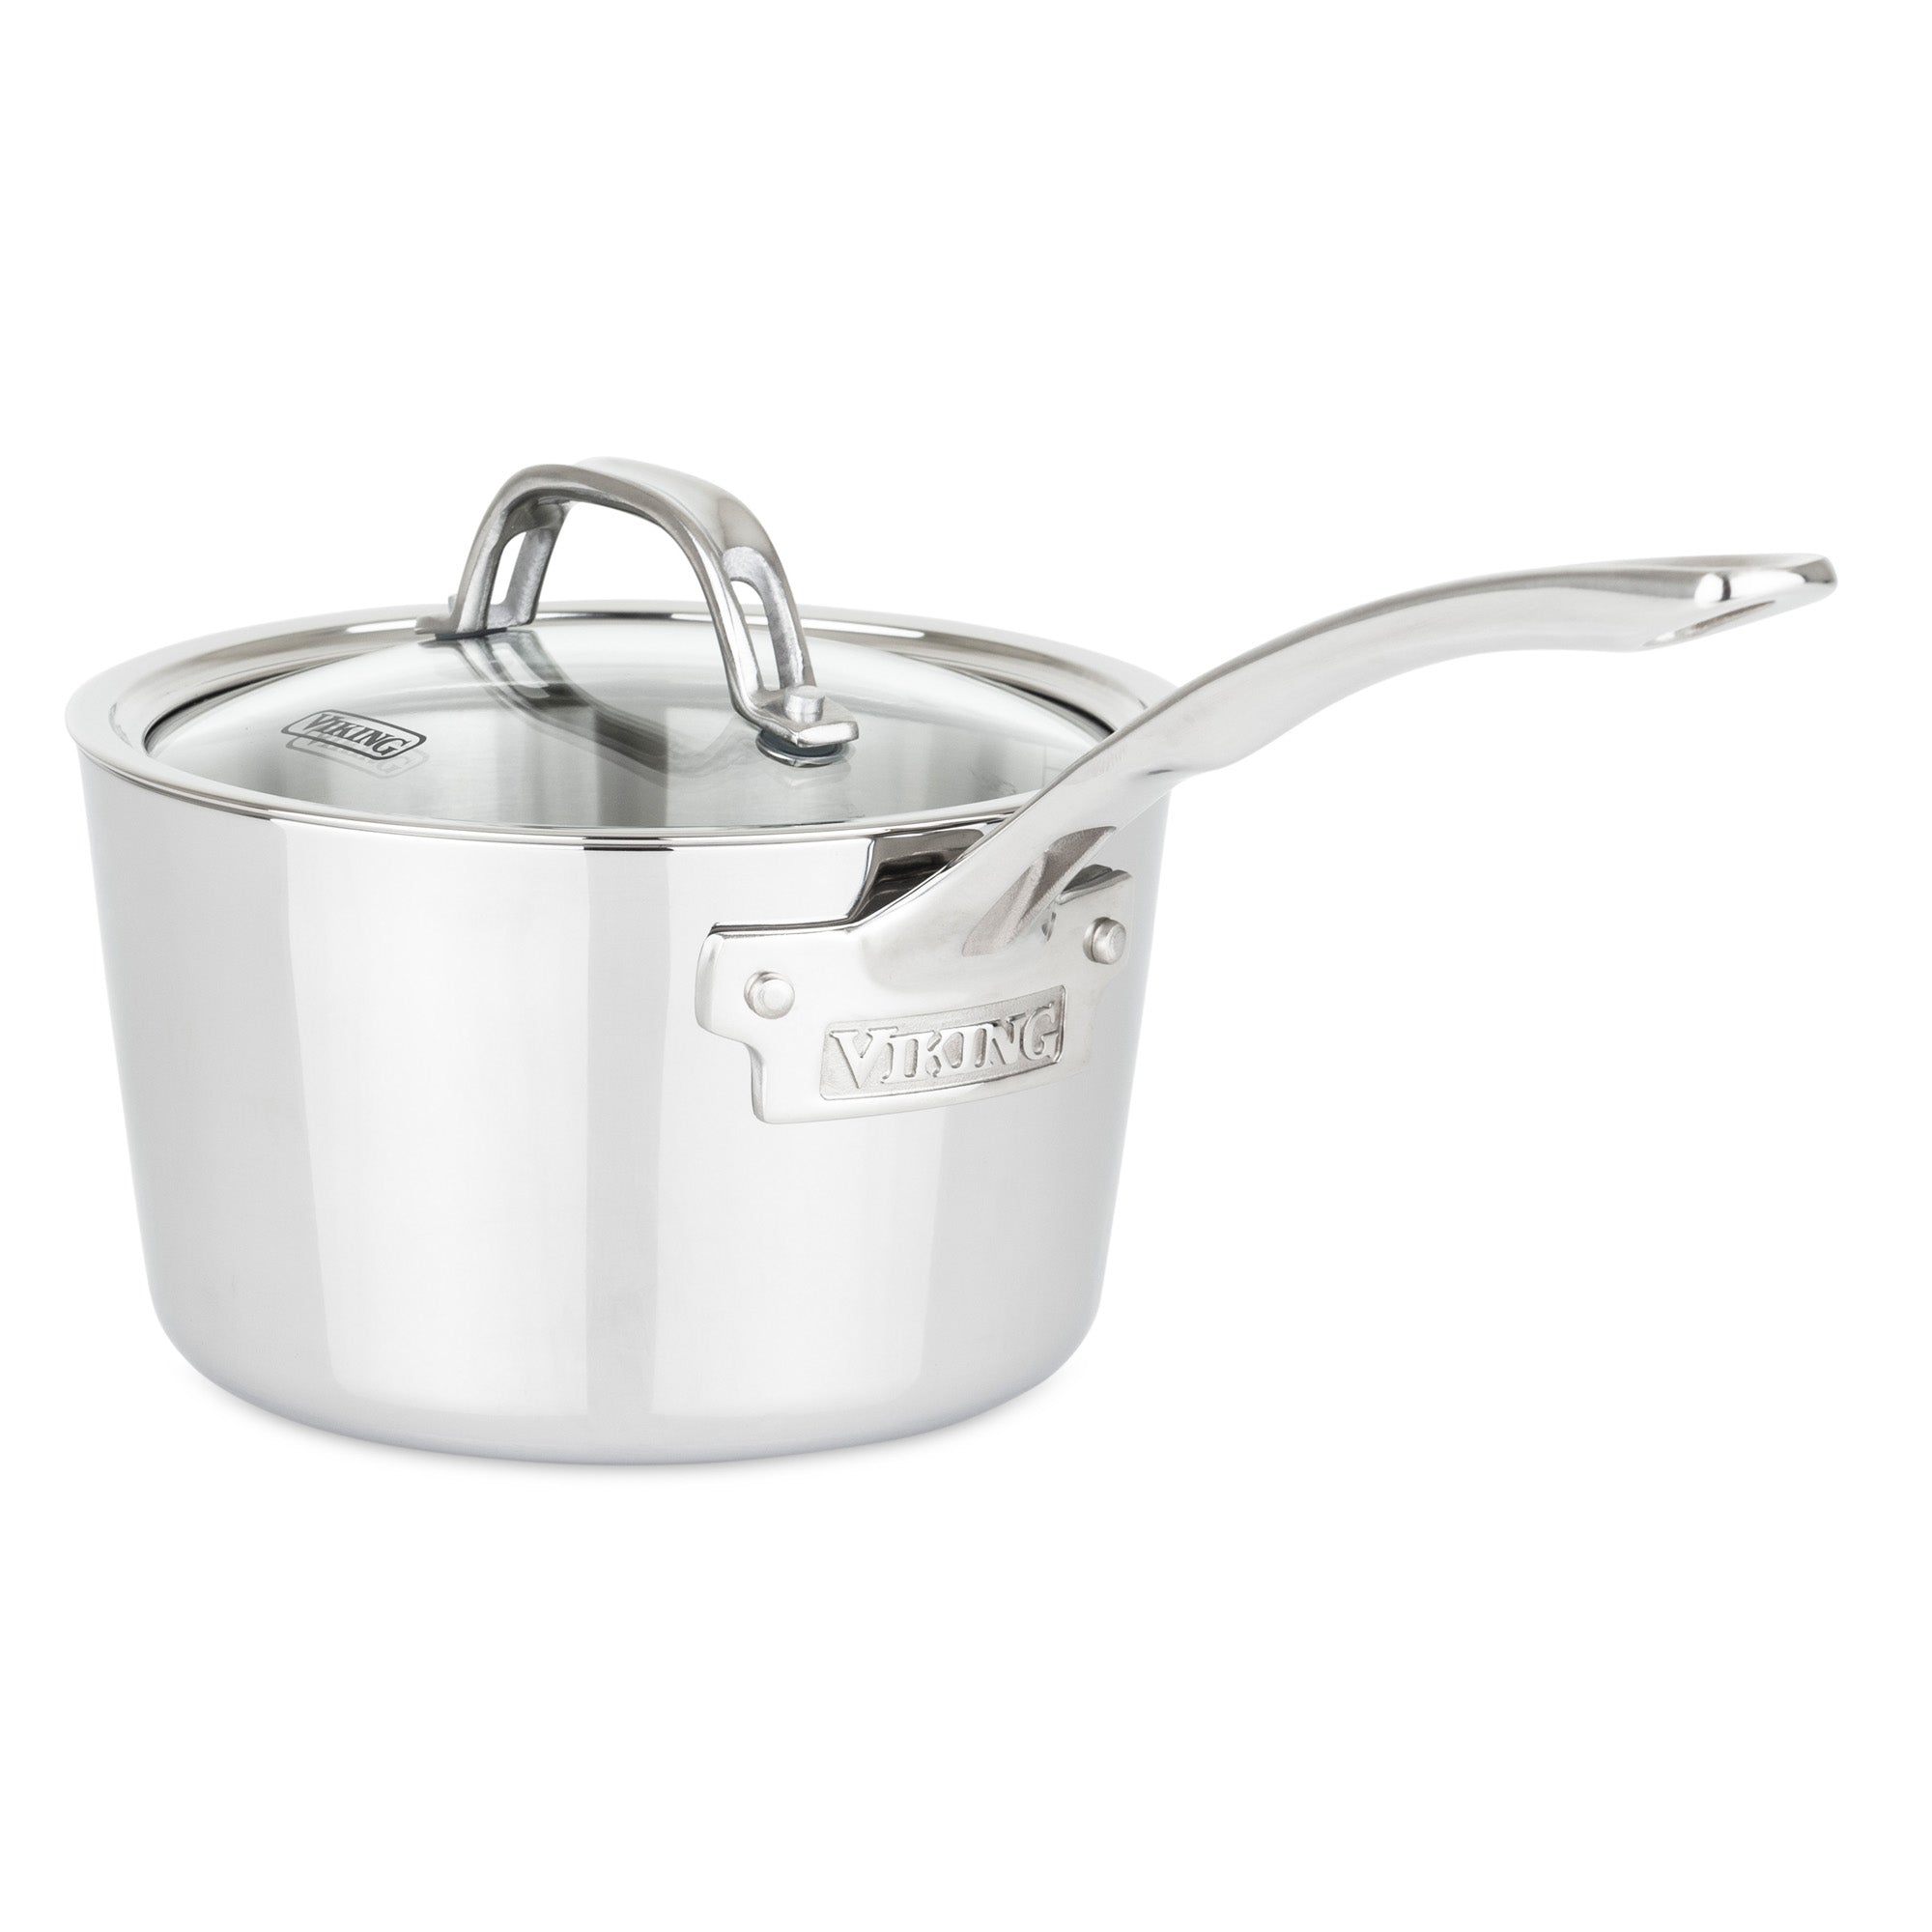 Cook N Home Saucepan Sauce Pot with Lid 2 Quart Stainless Steel